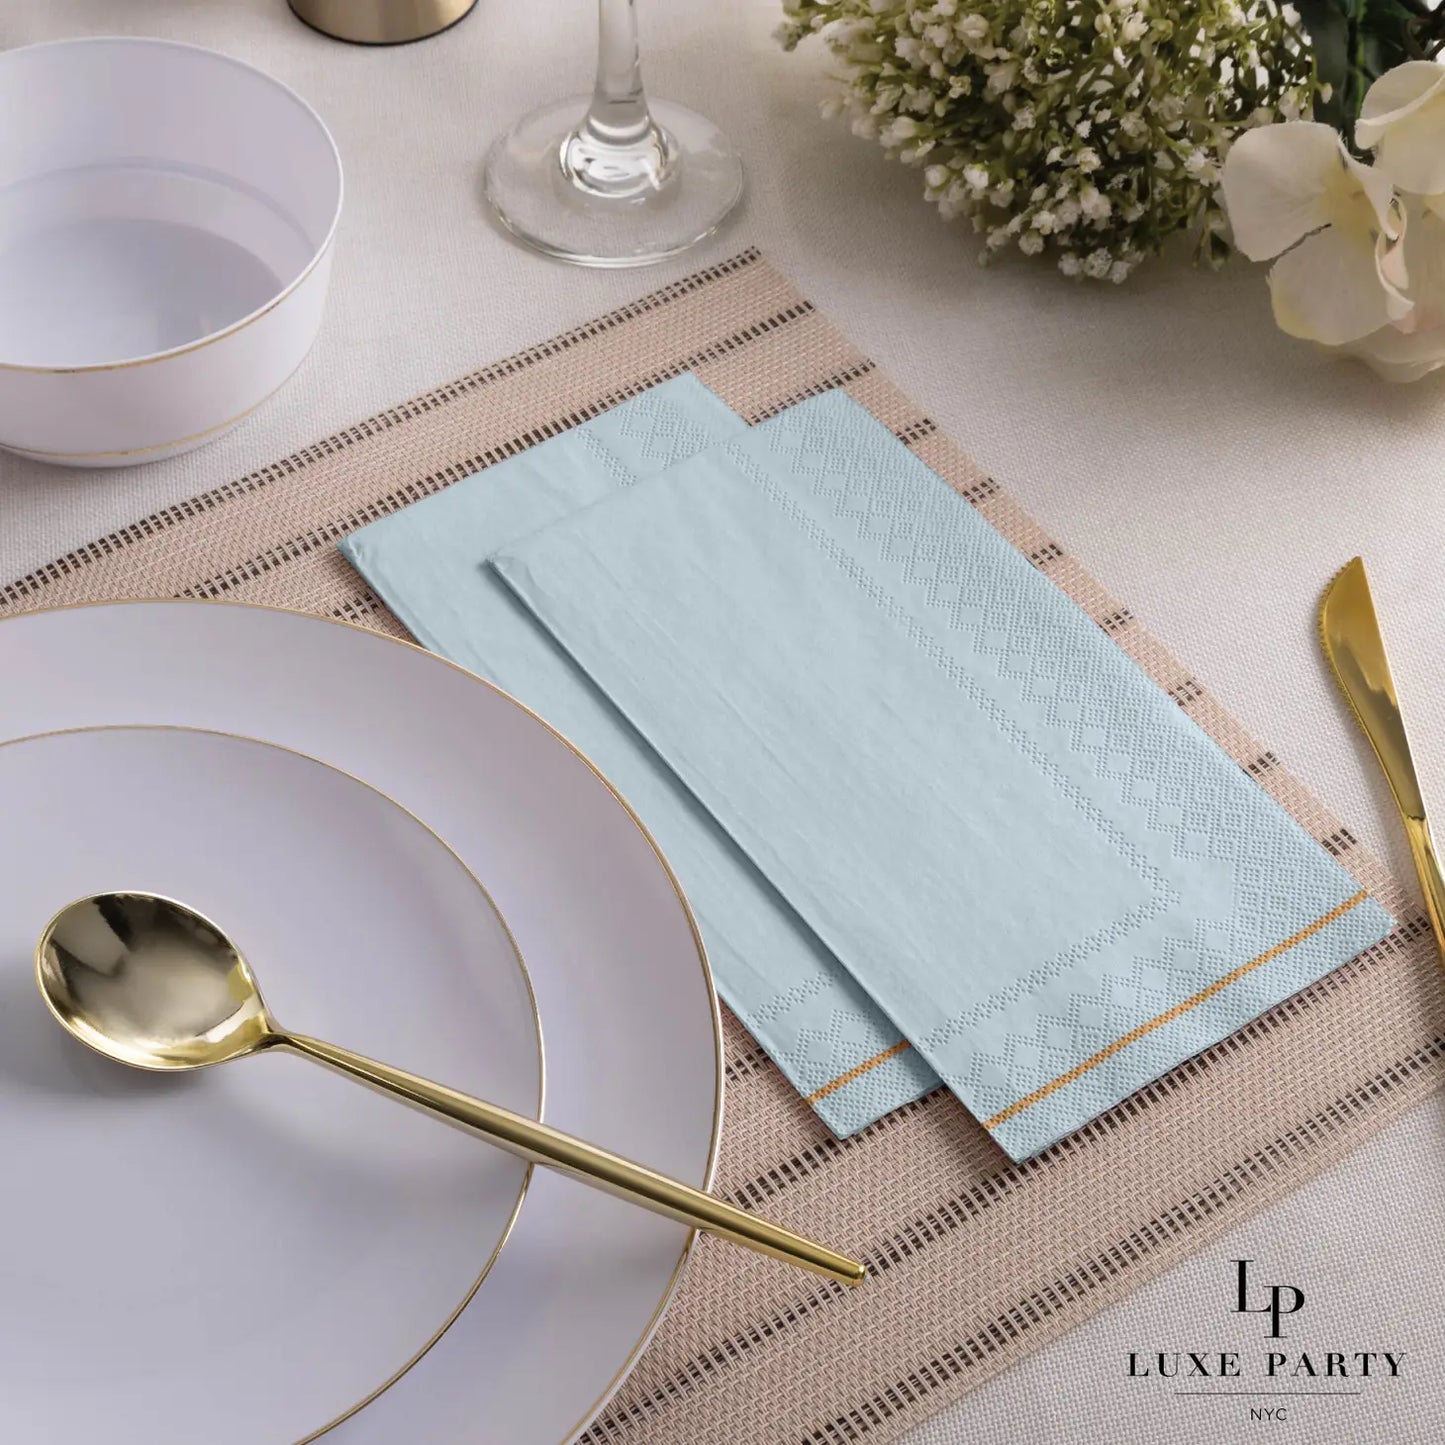 MINT WITH GOLD STRIPE NAPKINS